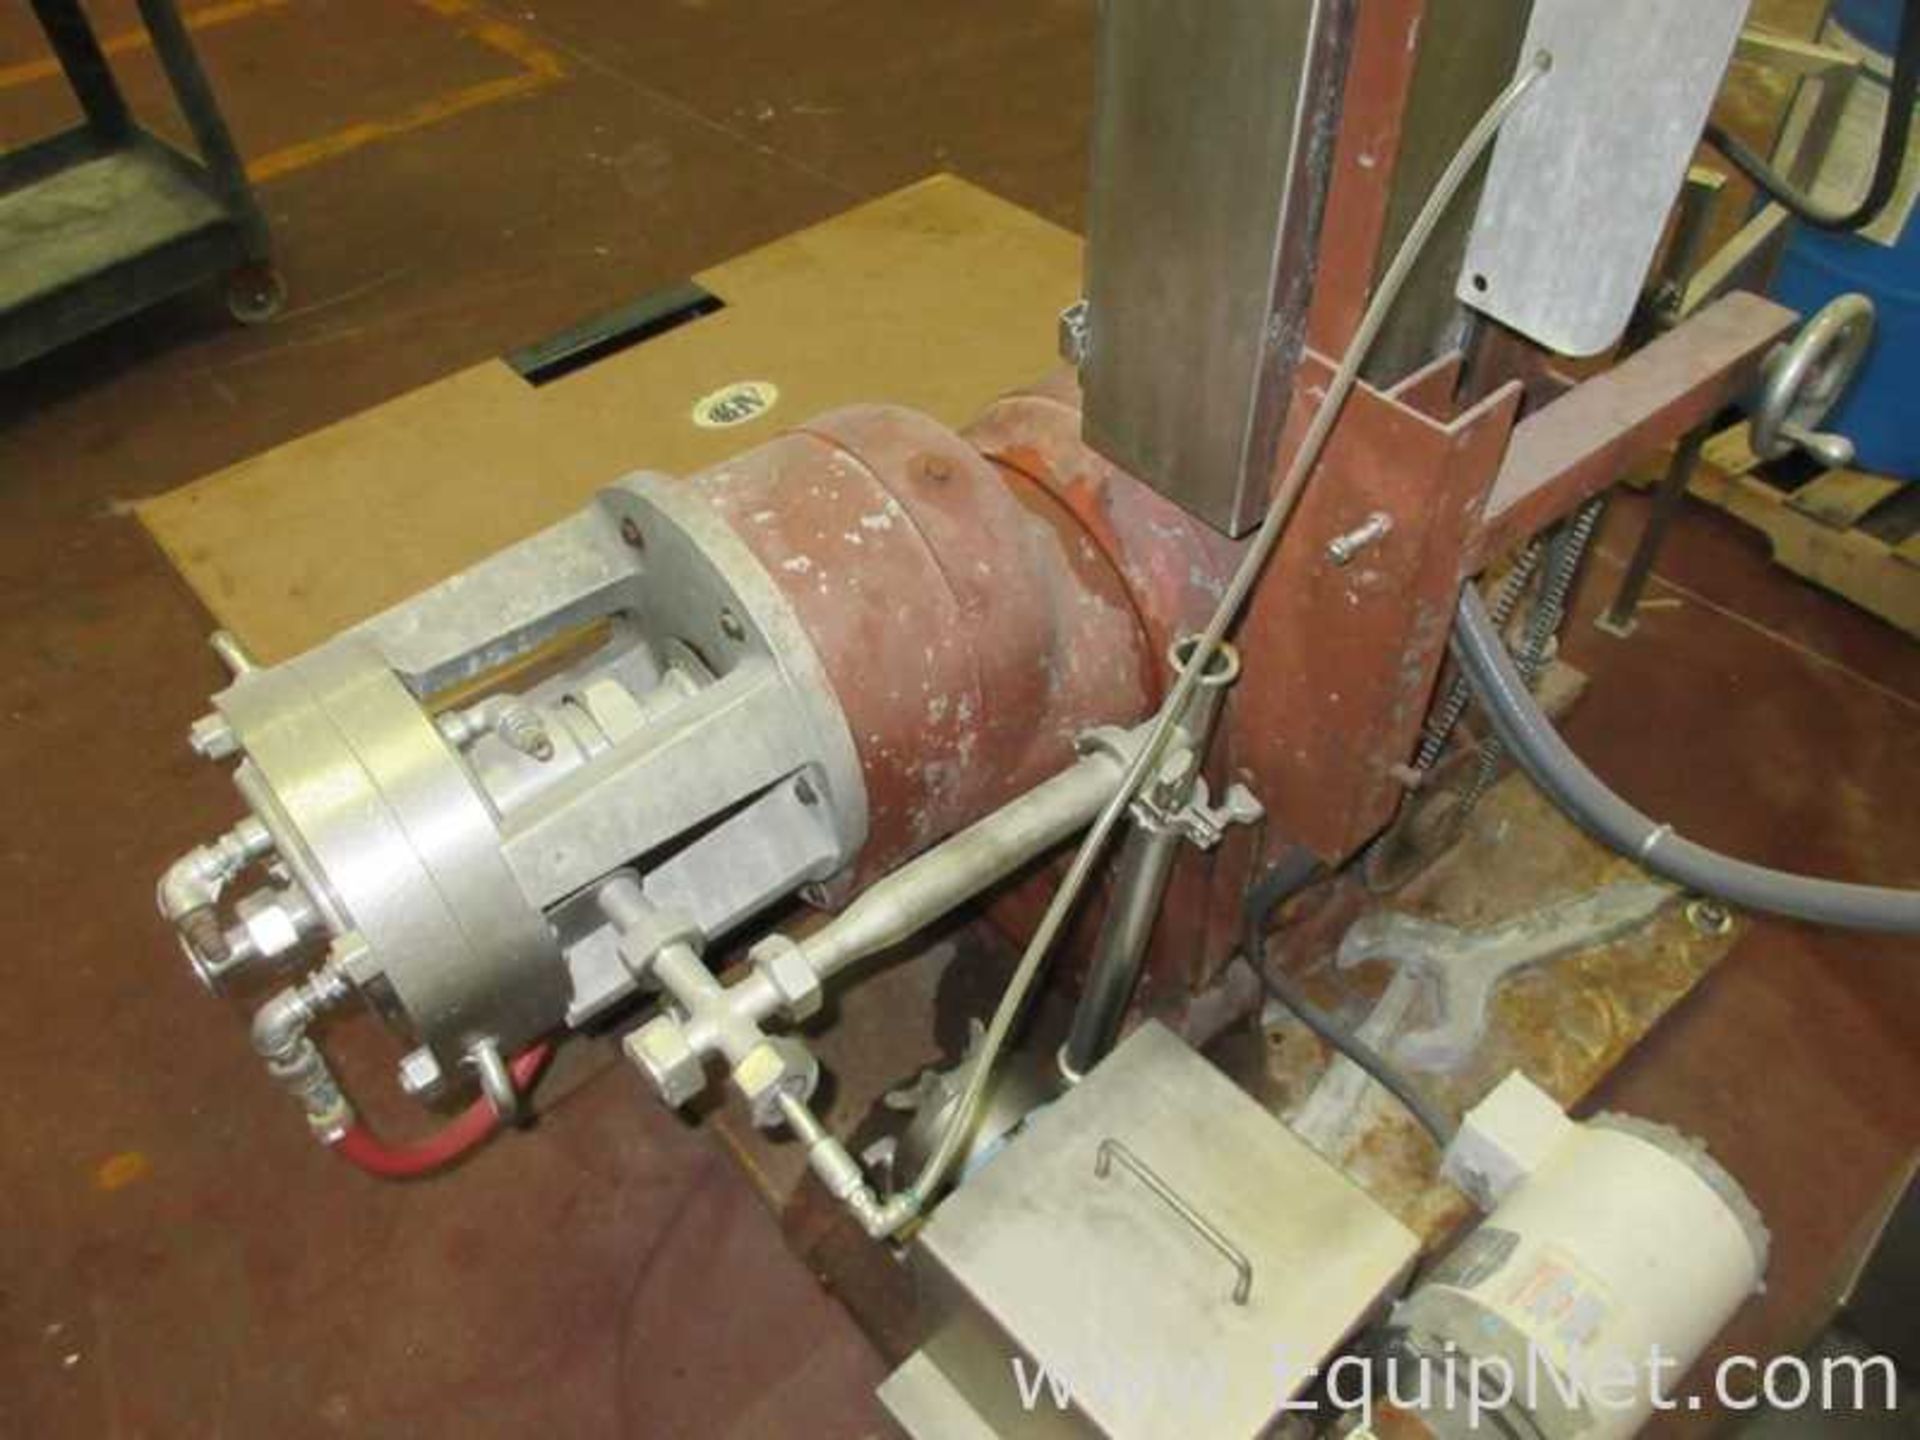 Whipper And Waukesha Positive Displacement Pump - Image 10 of 12